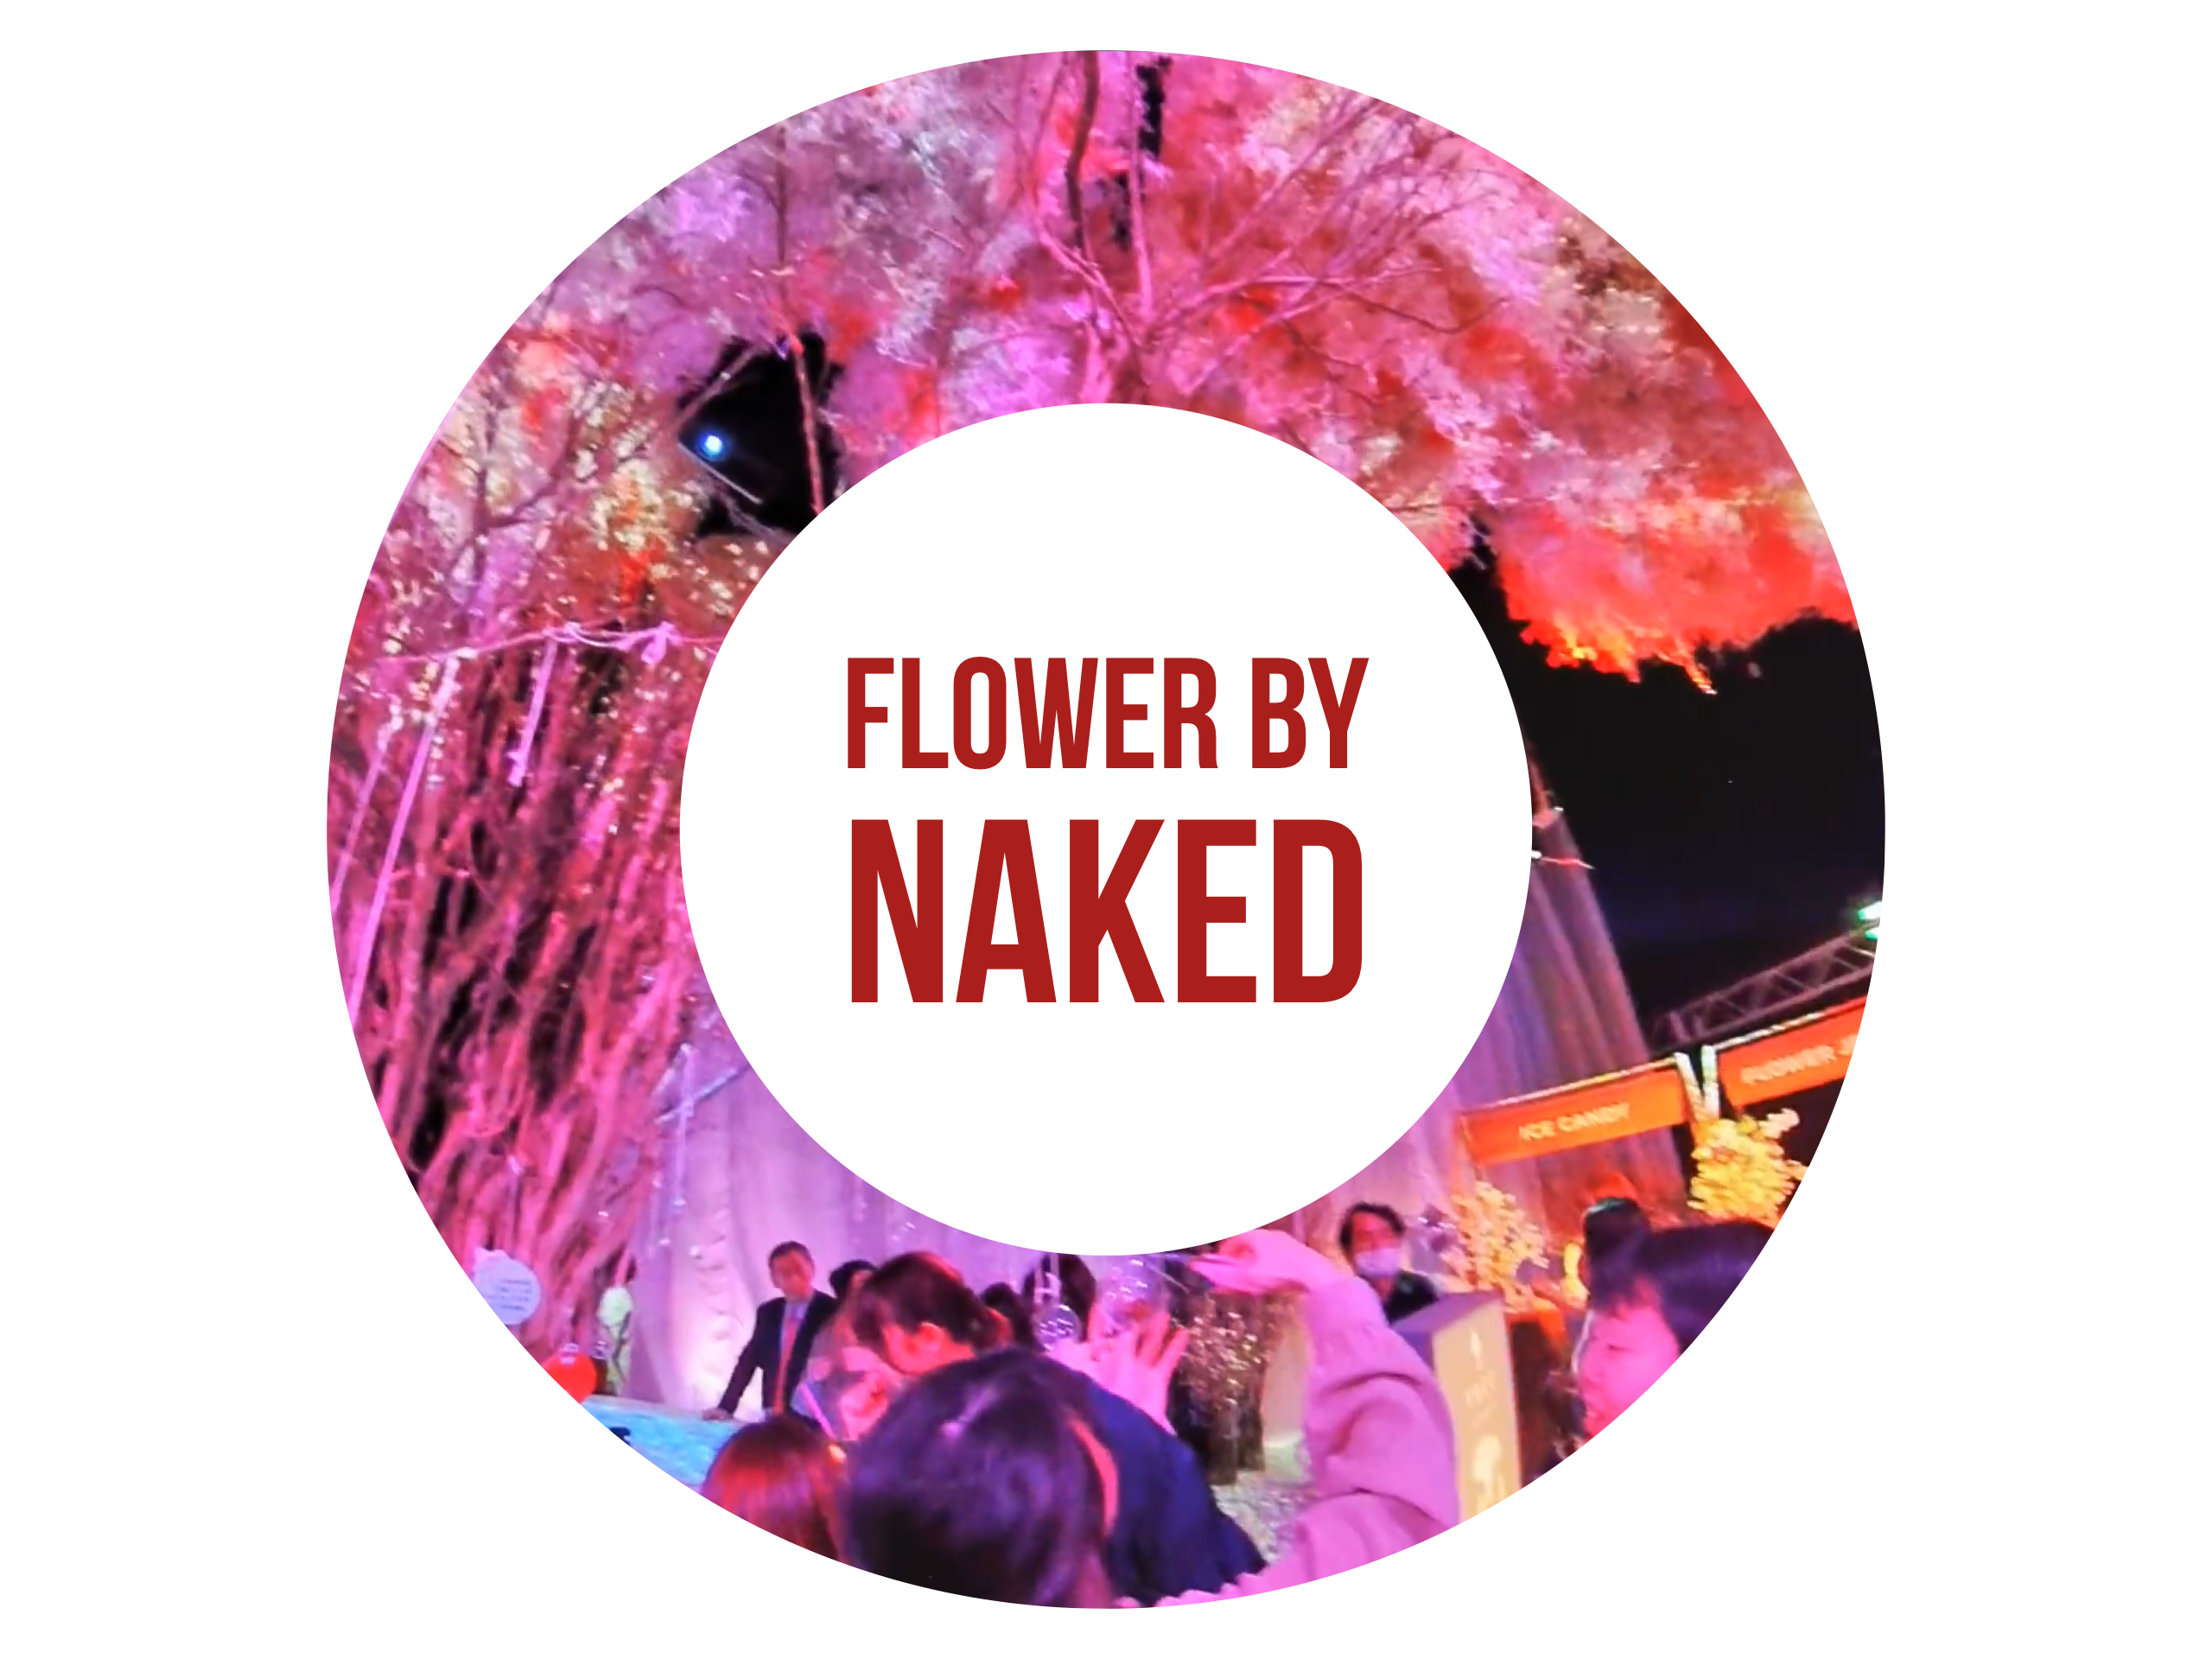 FLOWES BY NAKED